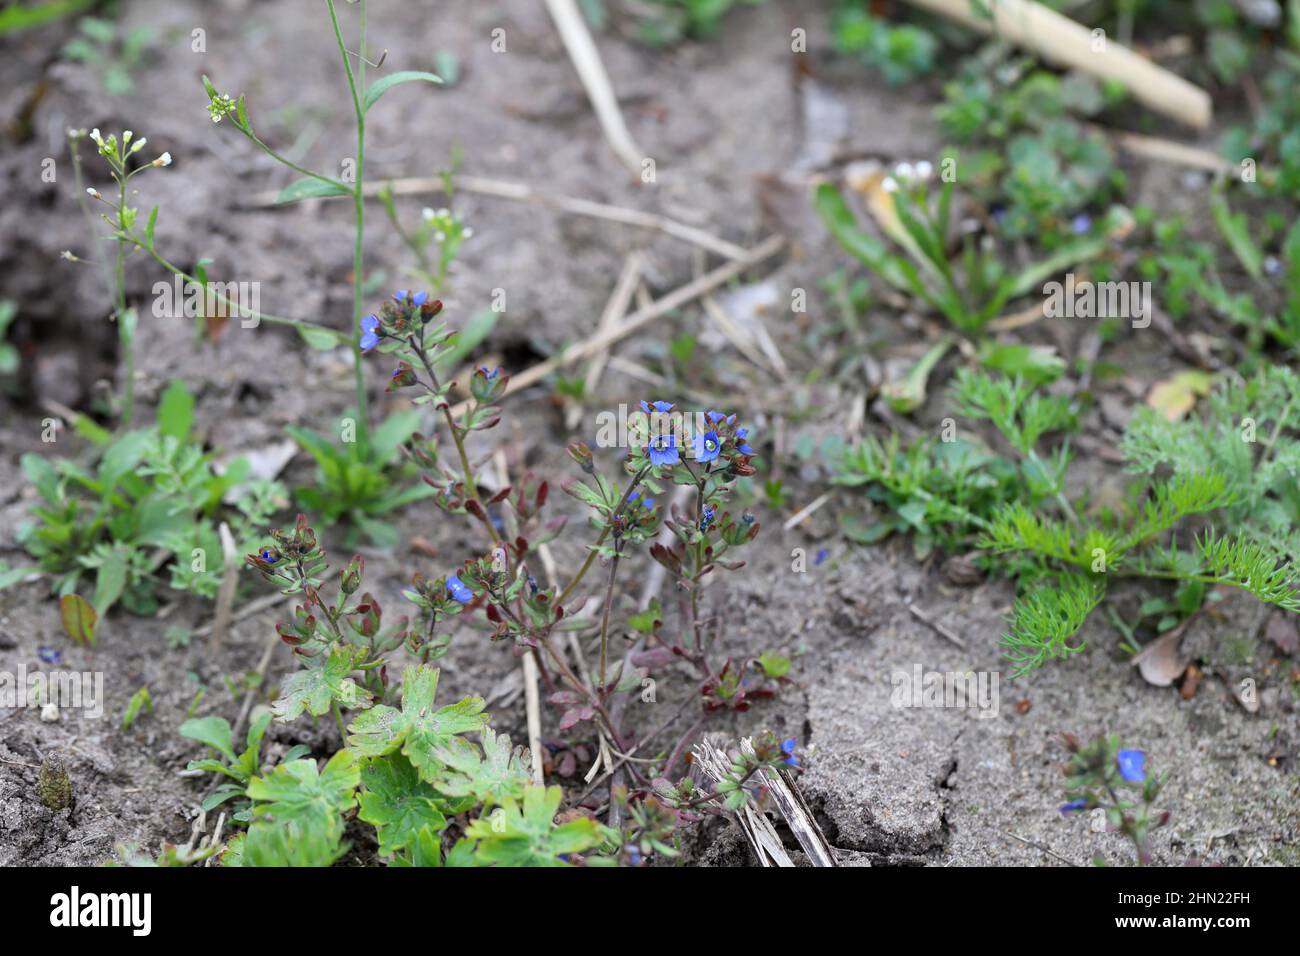 Veronica arvensis common names: wall speedwell of corn speedwell. Widespread and common weeds in agricultural and horticultural crops. Stock Photo